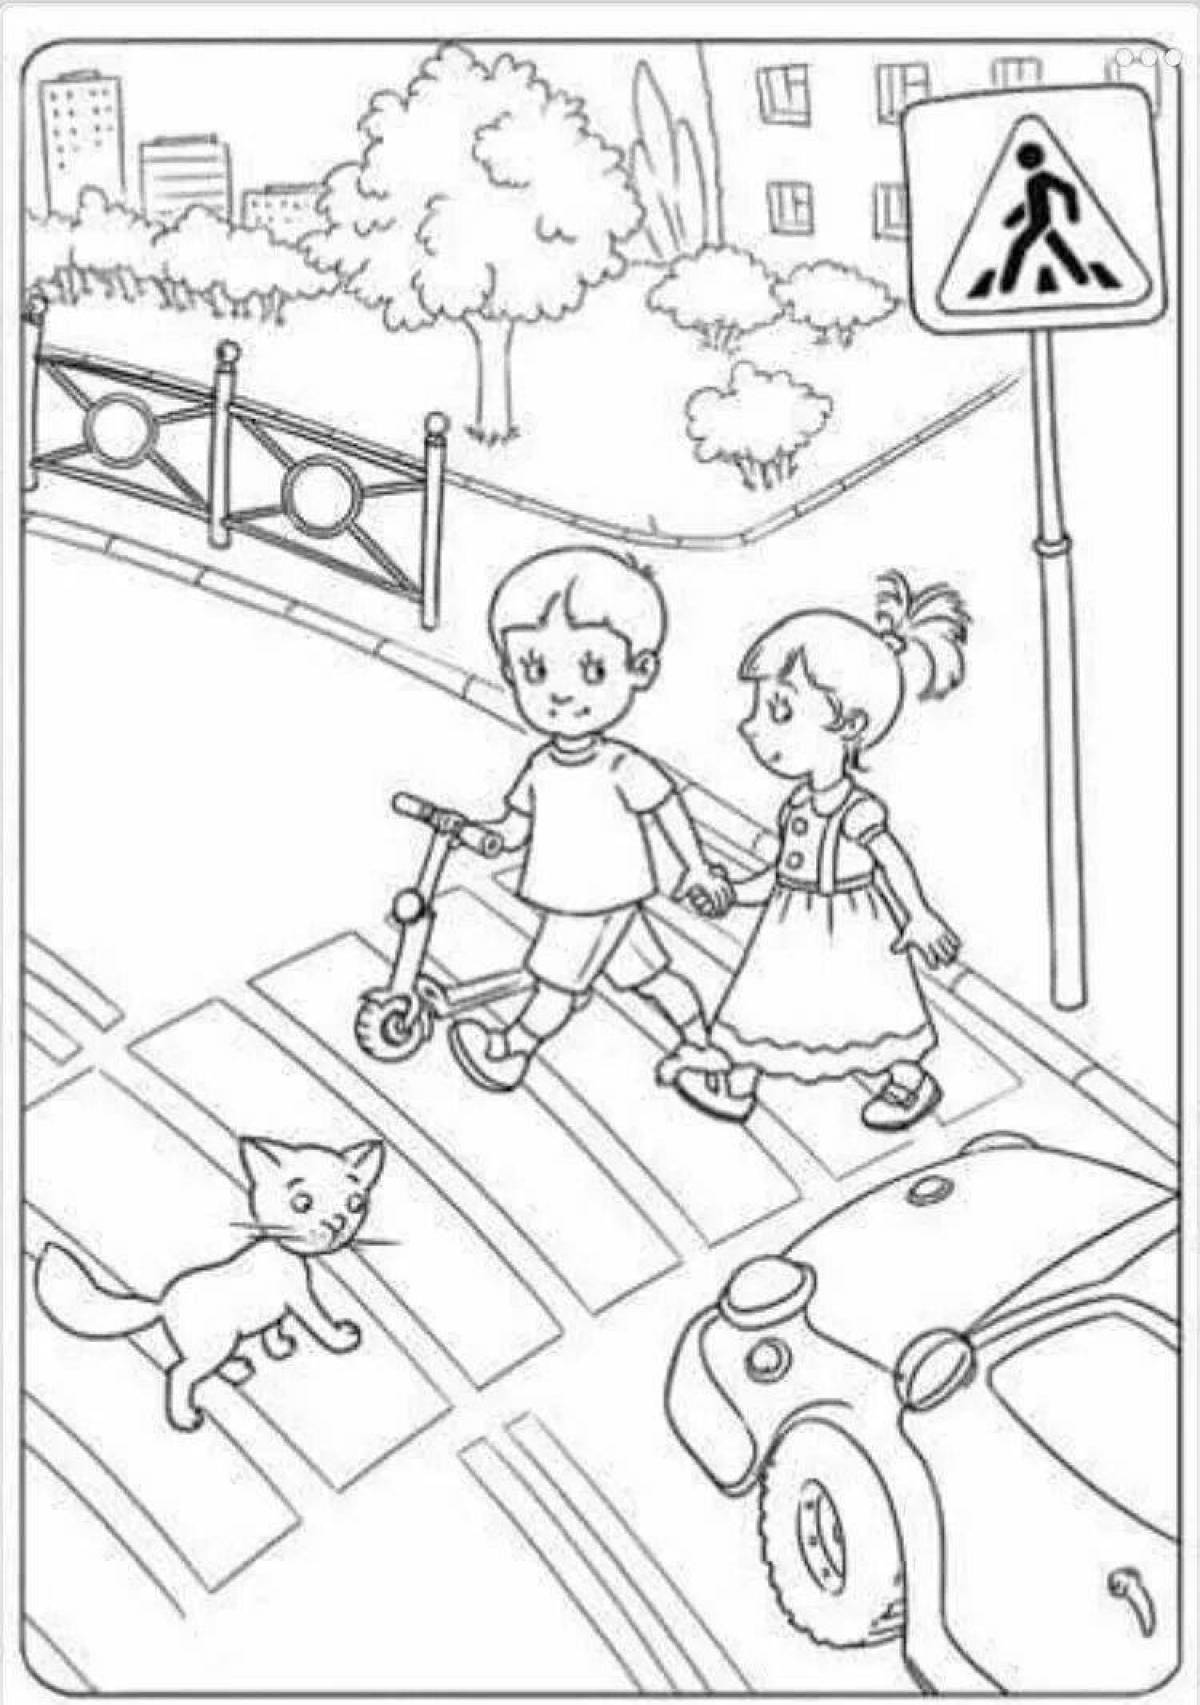 Creative road safety coloring book